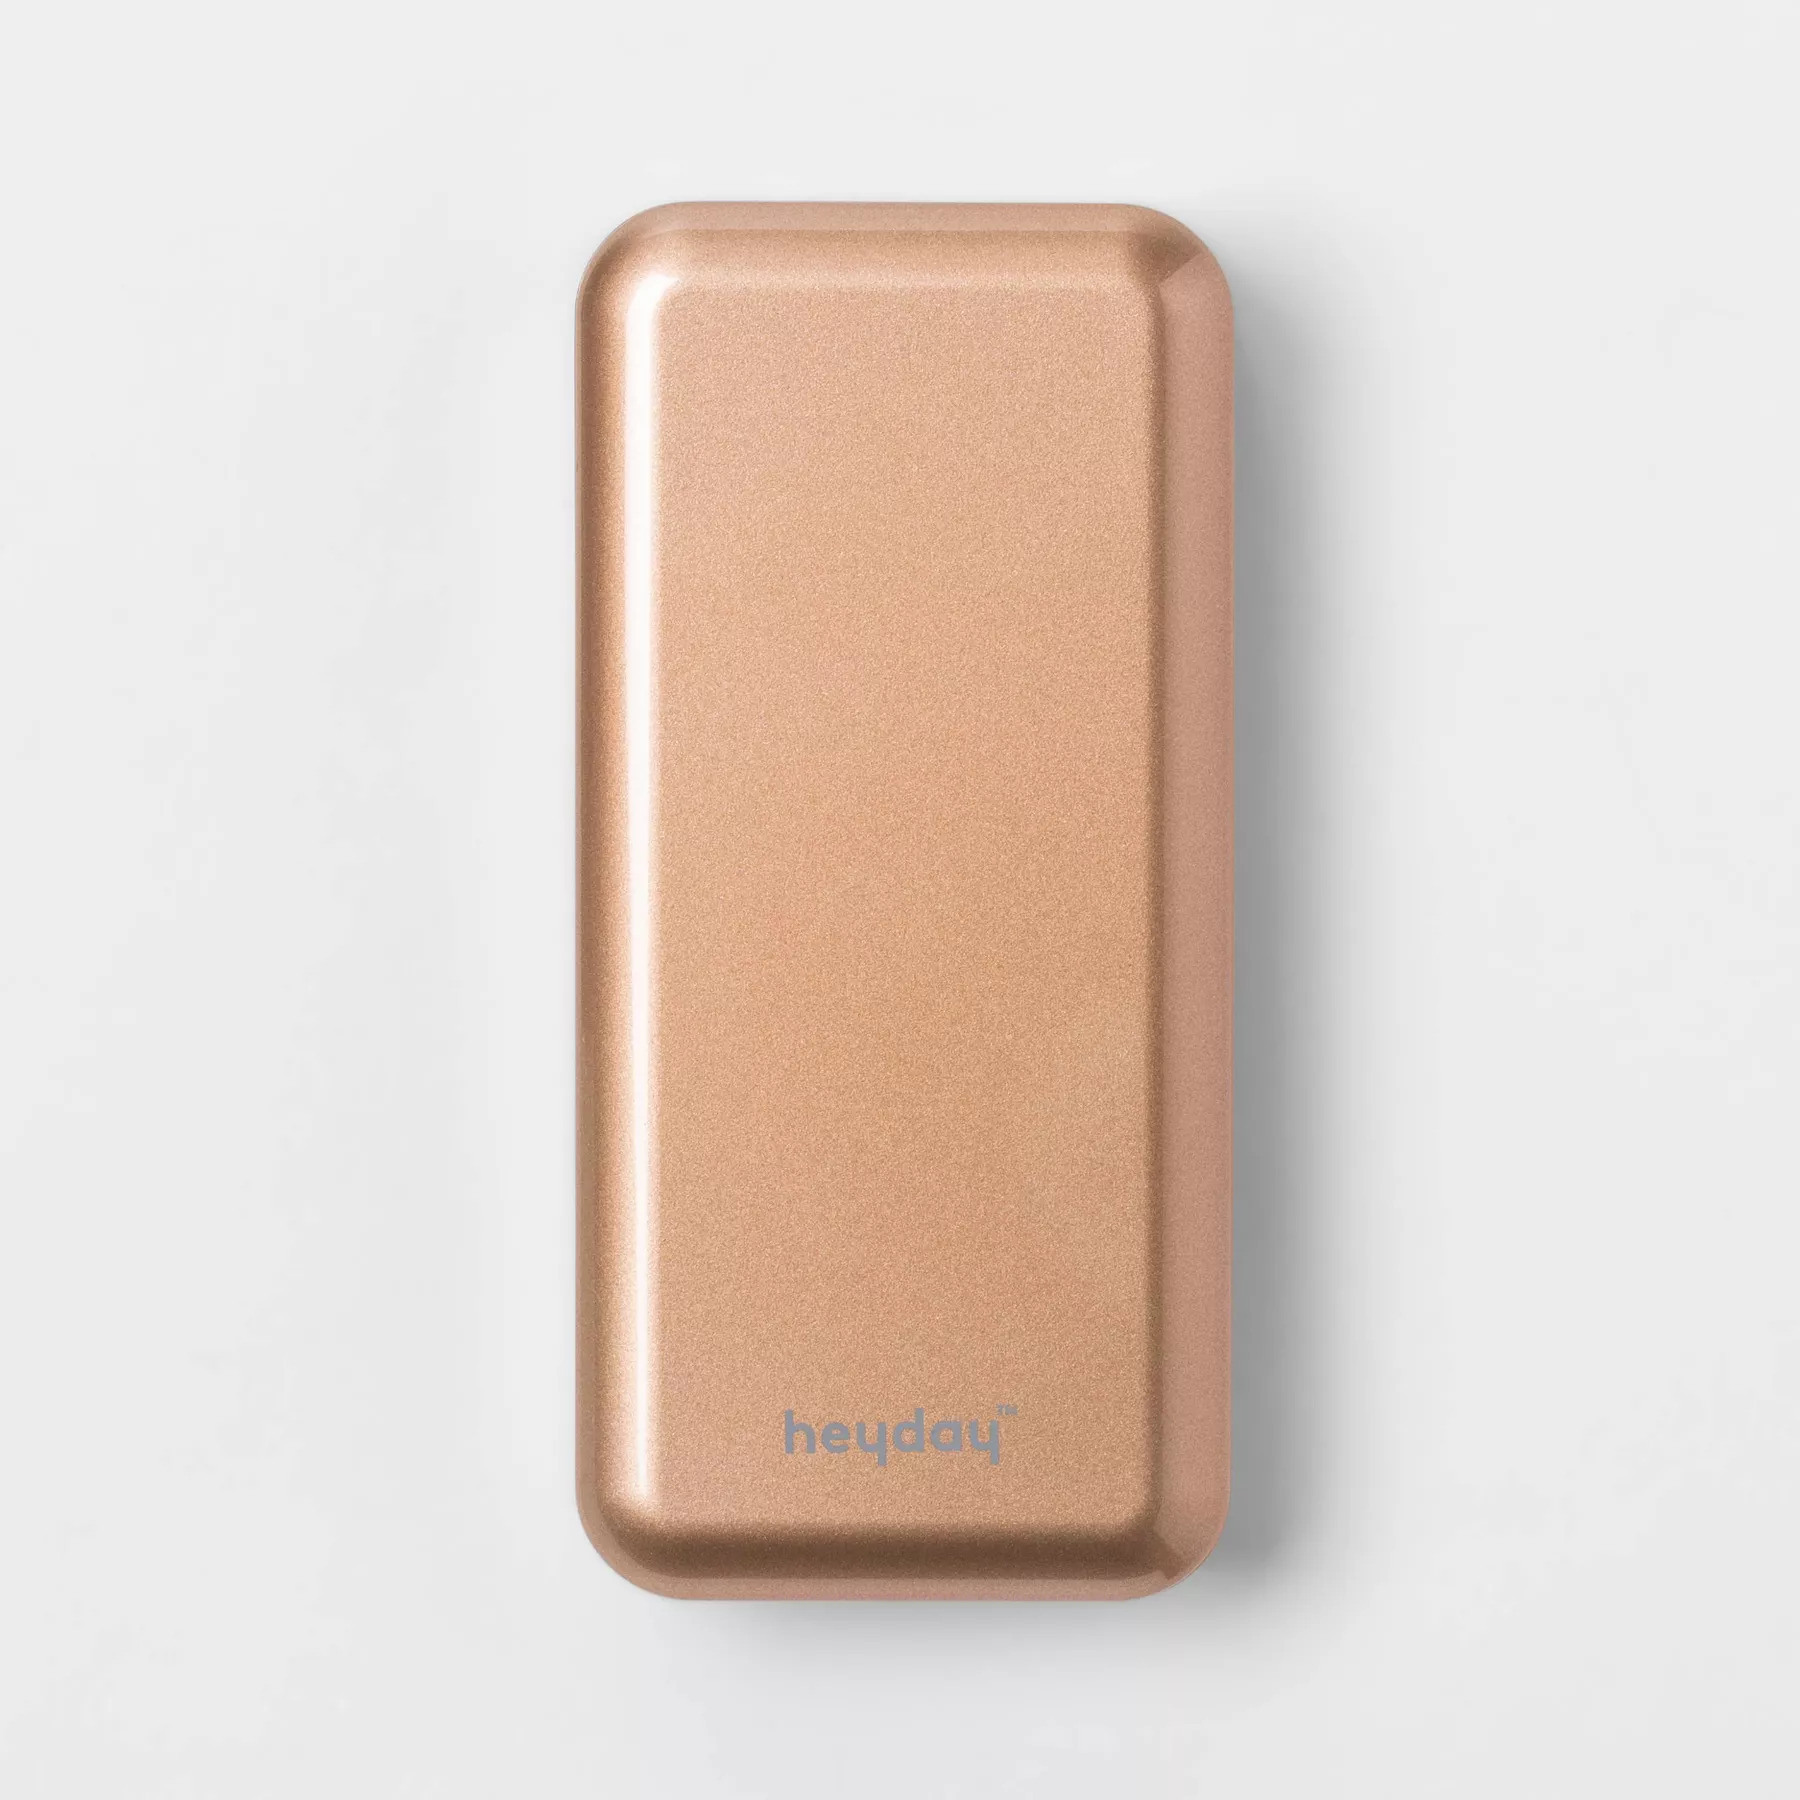 The power bank in gold metallic